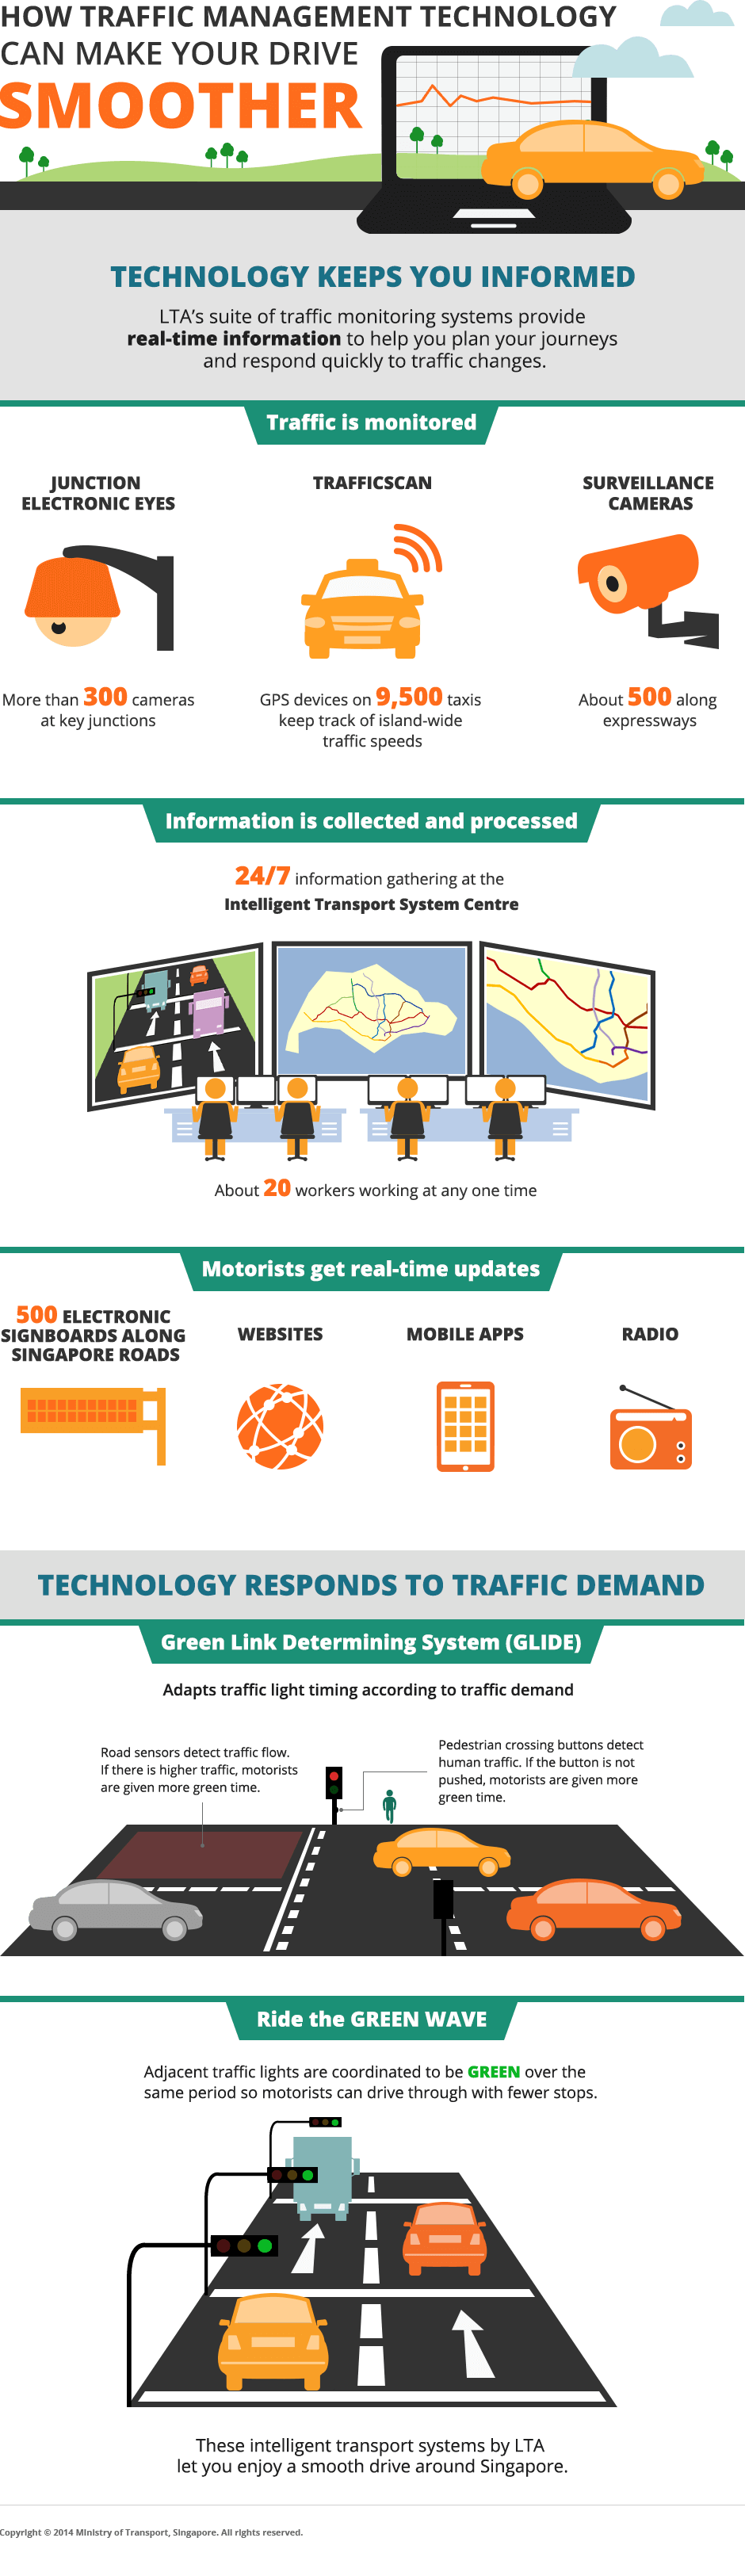 how traffic management technology can make driving smooth page infographic 